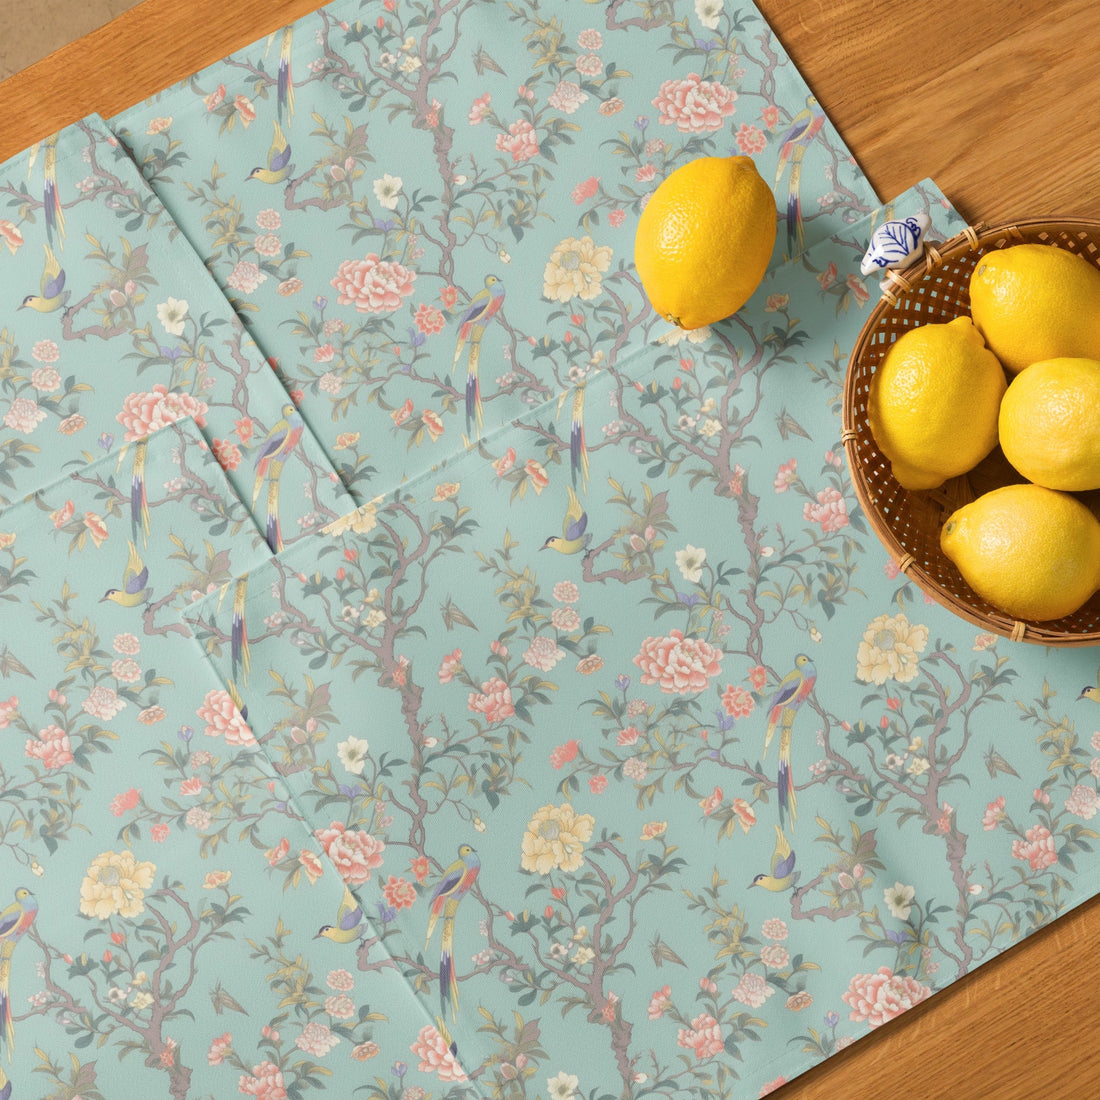 Kate McEnroe New York Pastel Chinoiserie Placemats, Set of 4, Elegant Floral and Bird Table MatsPlacemats9231200_17484